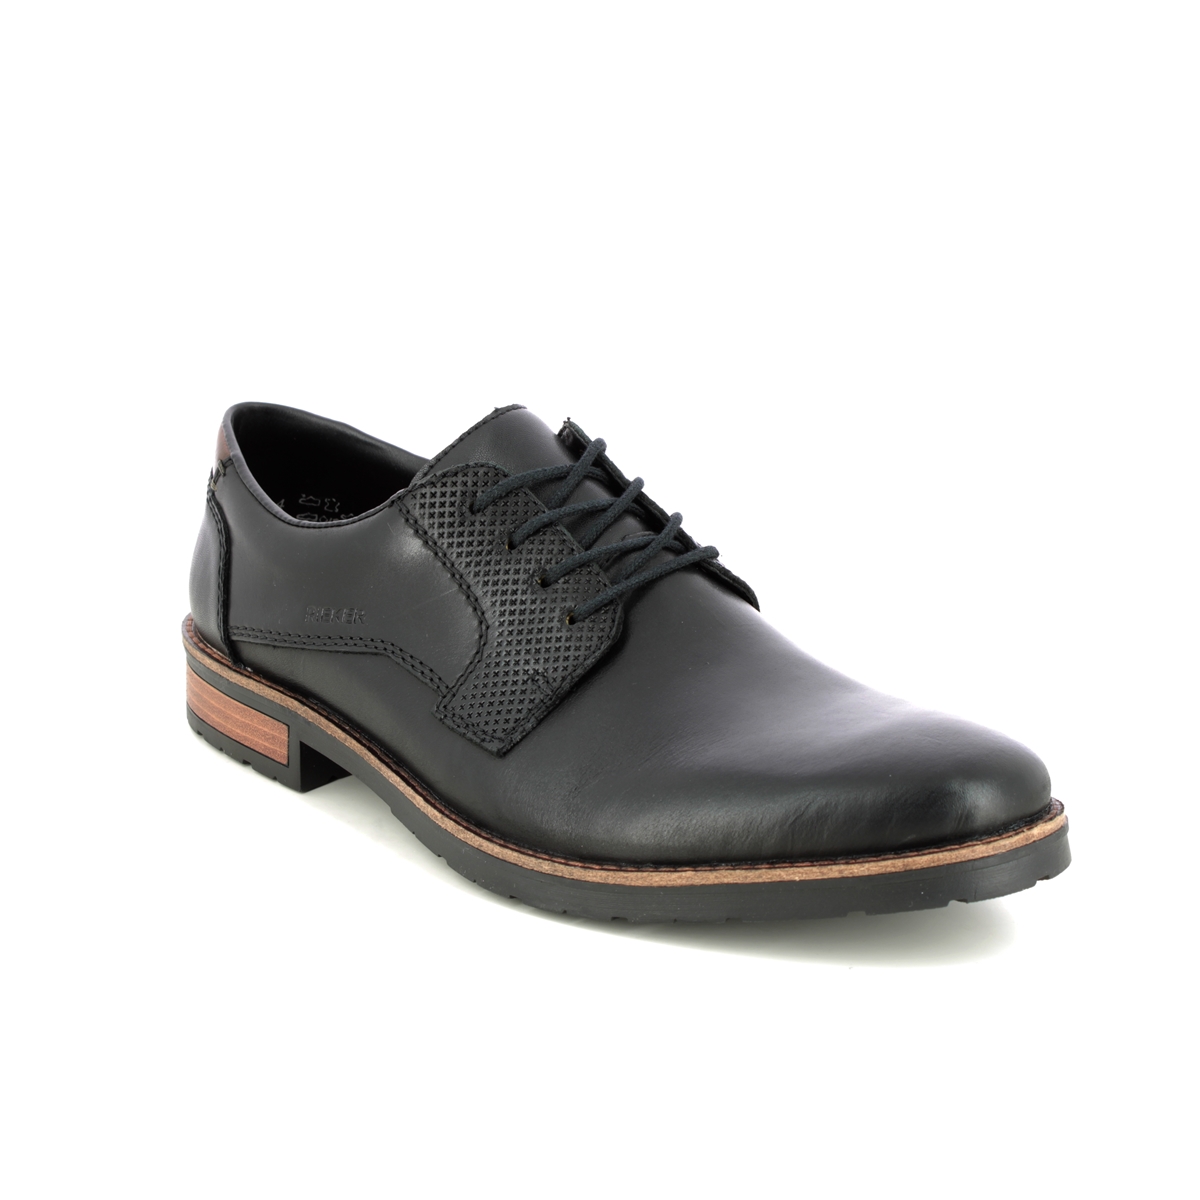 Rieker Claradam Black Leather Mens Formal Shoes 14601-00 In Size 43 In Plain Black Leather